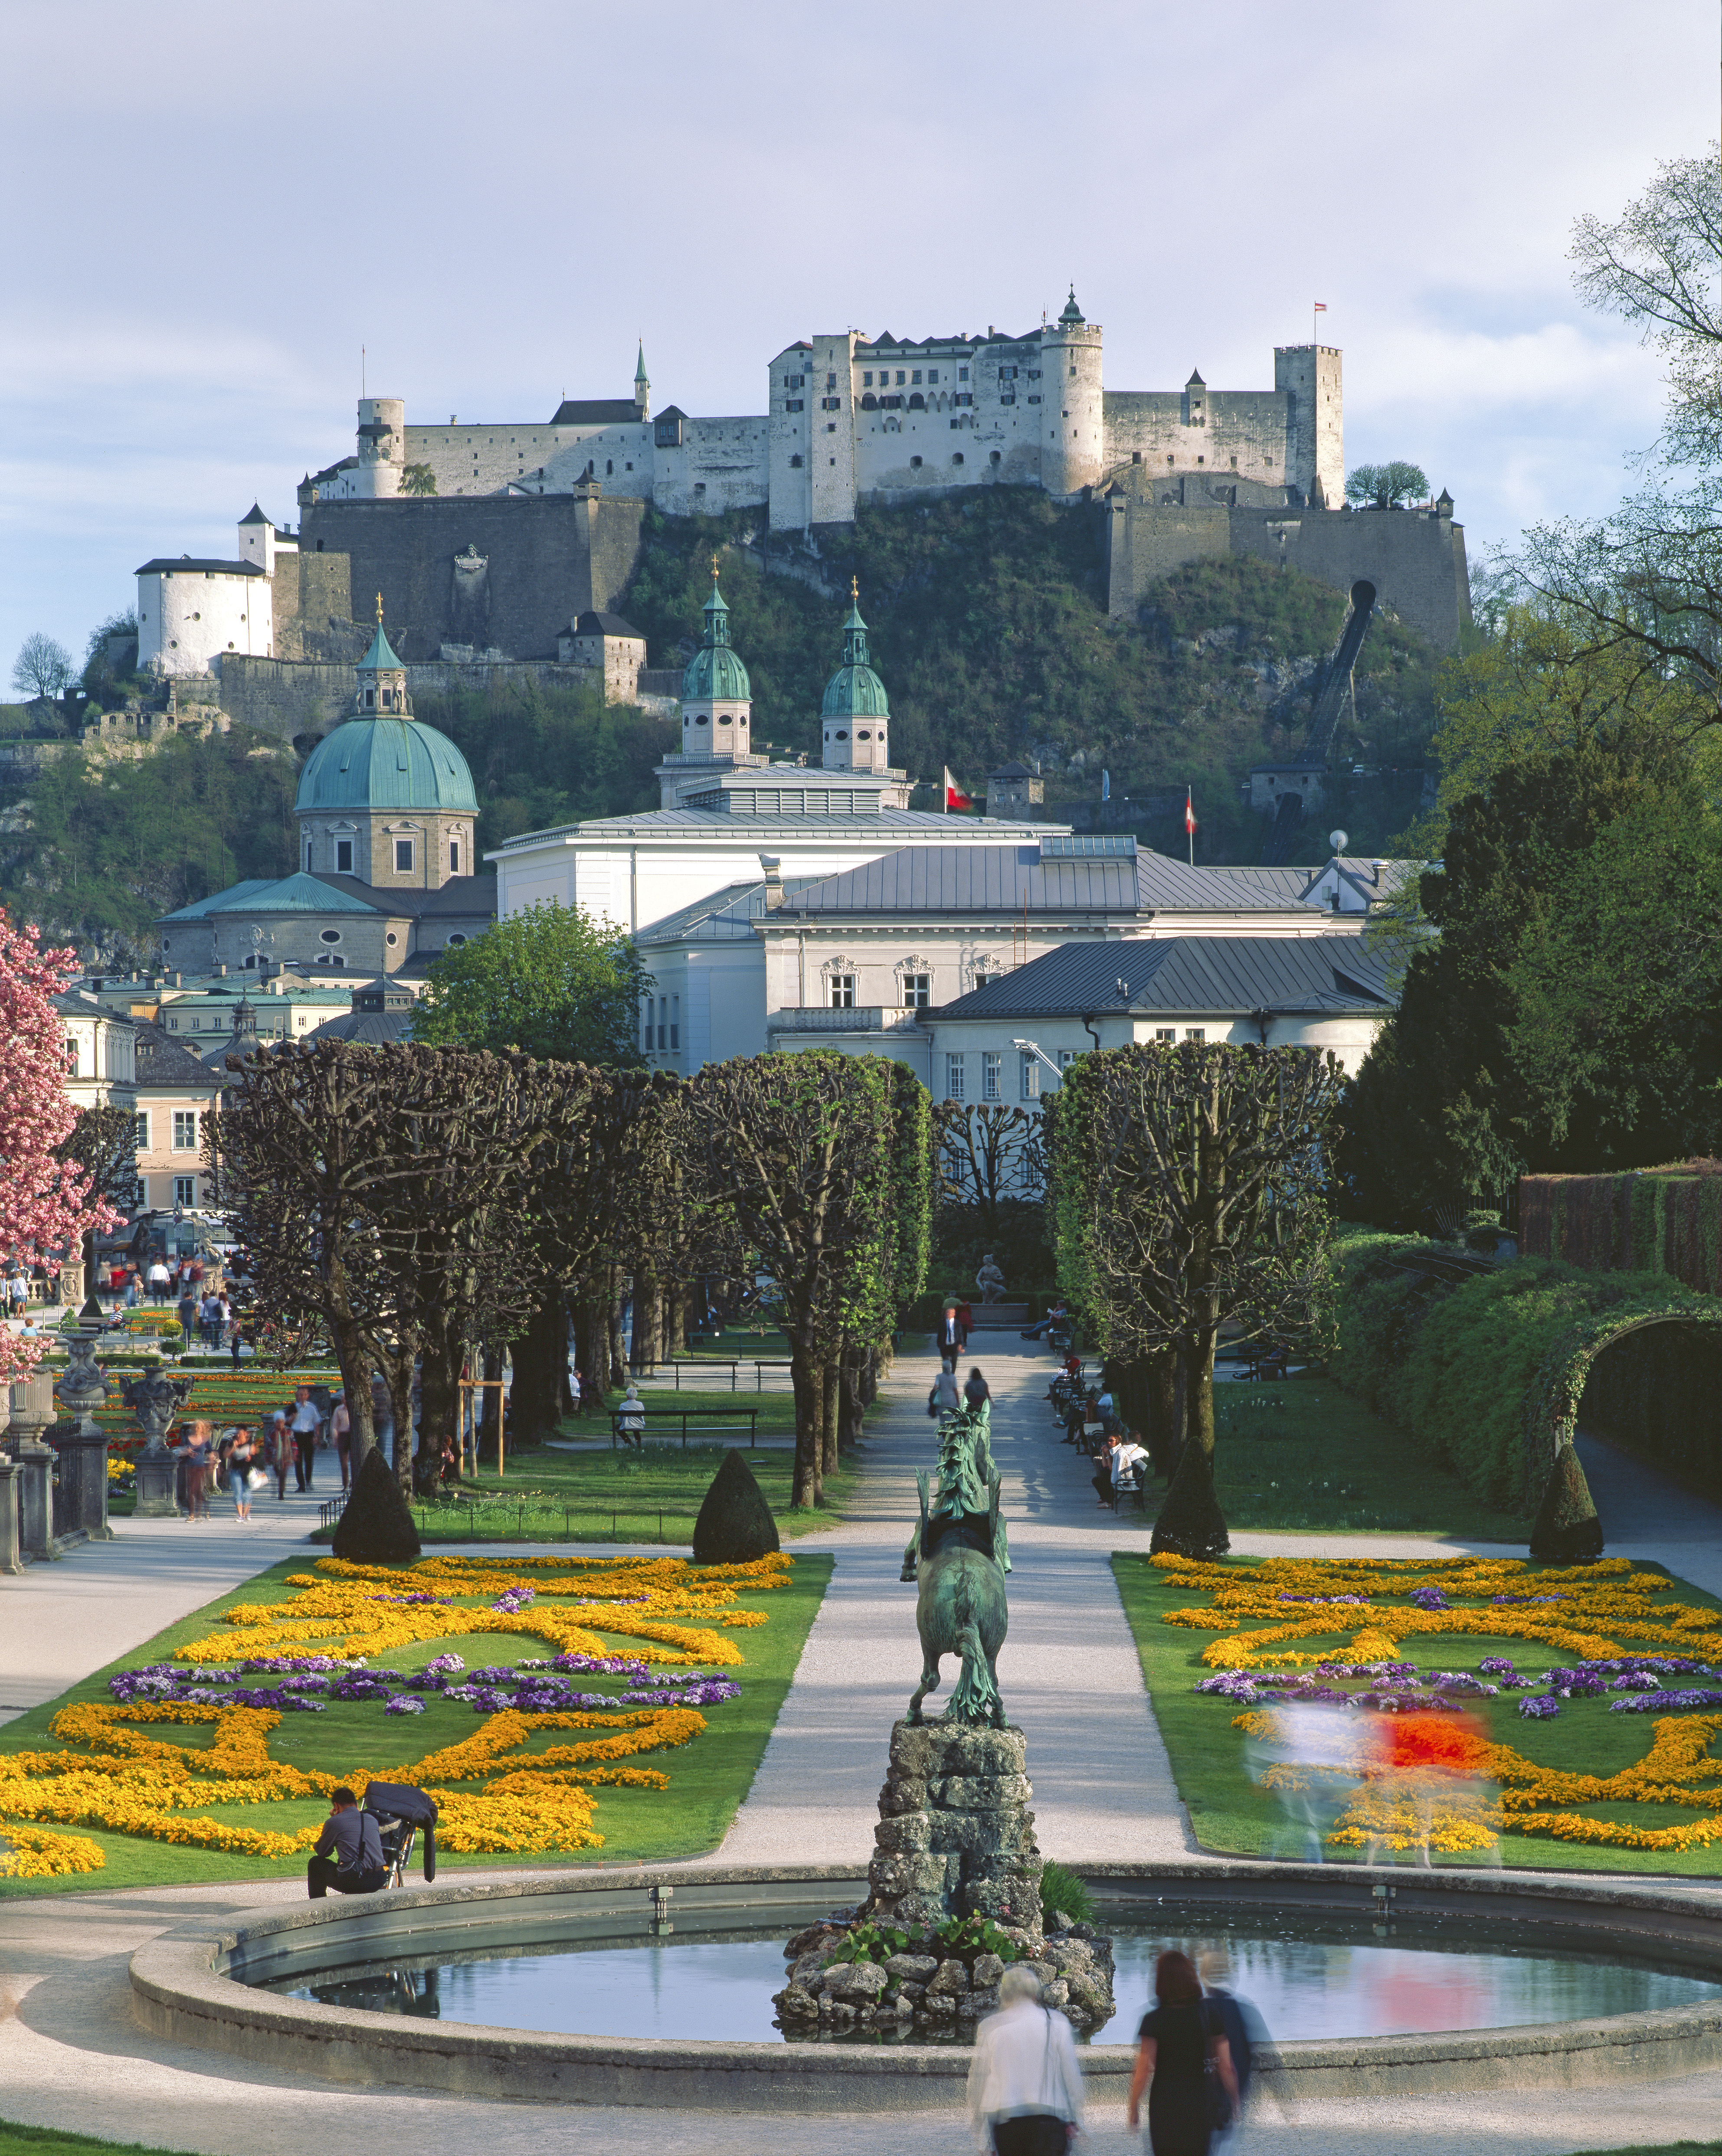 The medieval Hohensalzburg Fortress overlooking Mirabell Palace and Gardens in Salzburg